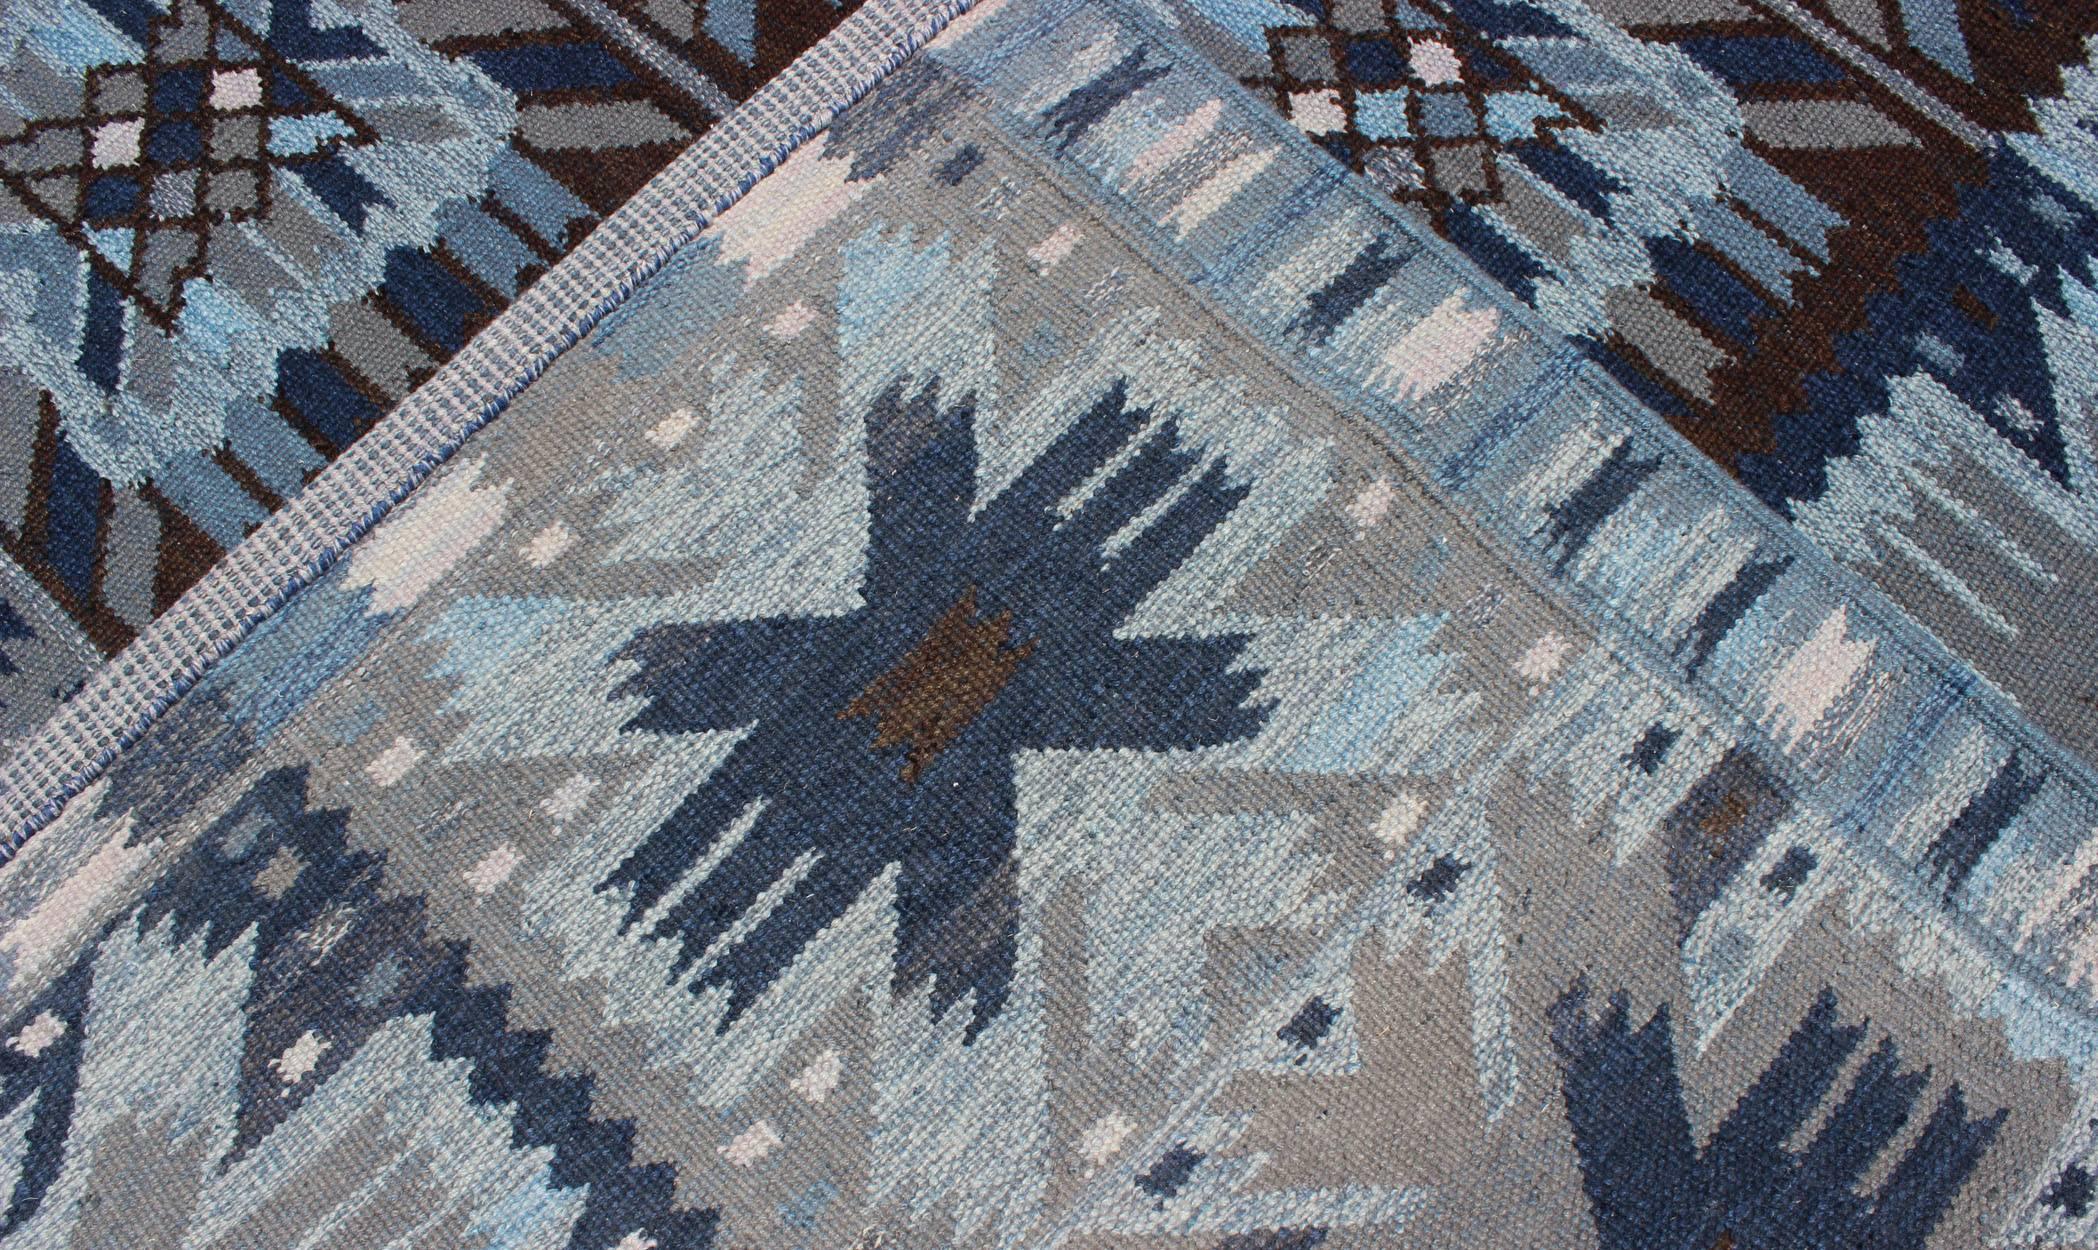 Contemporary Scandinavian Flat-Weave Swedish Design Rug in Blue & Brown Colors In Excellent Condition For Sale In Atlanta, GA